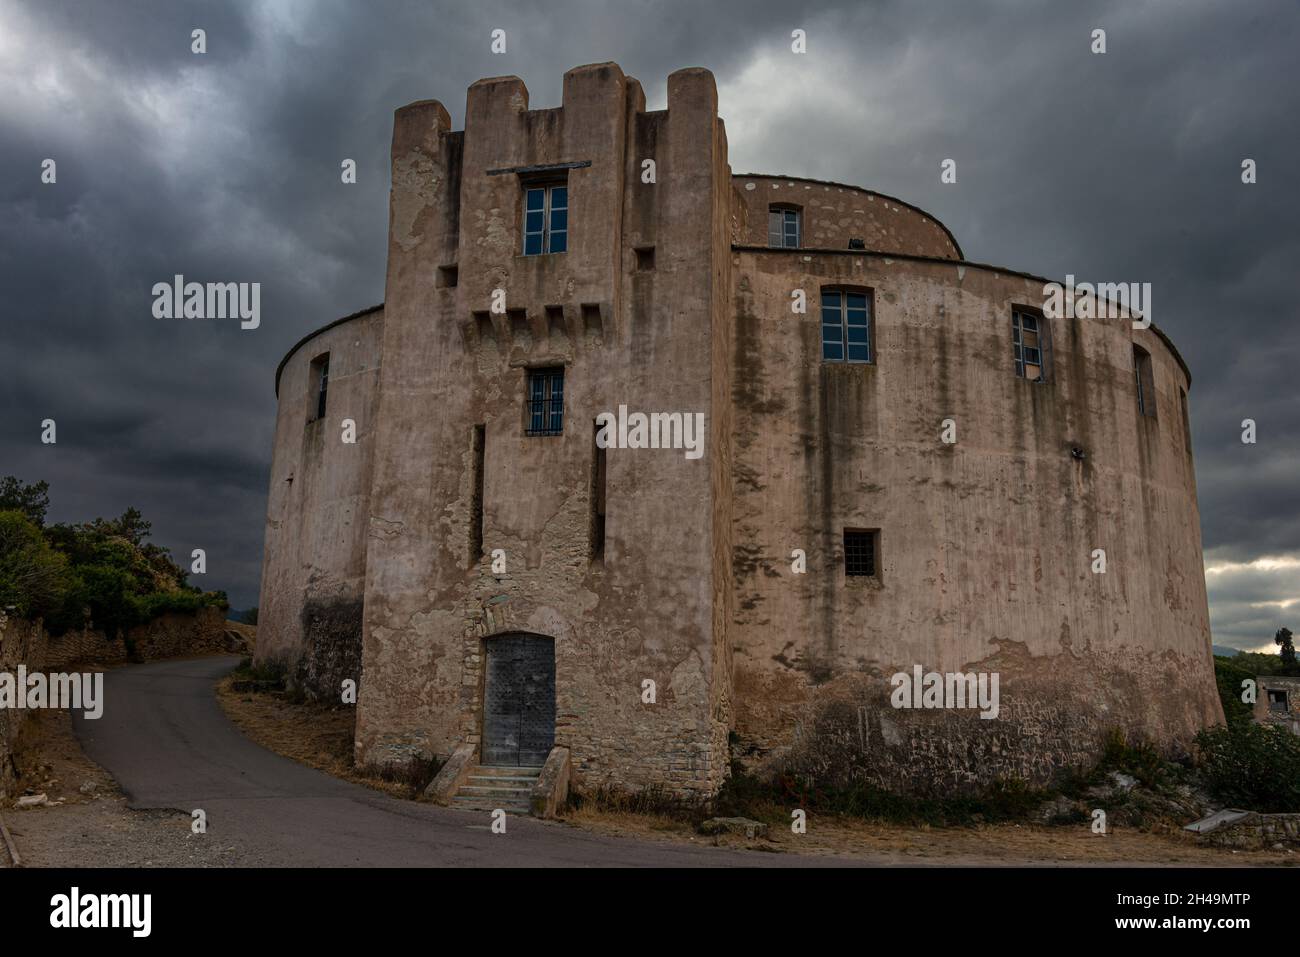 The Citadel at Saint Florent ,corsica France .against a dramatic sky ,holiday destinations . Stock Photo